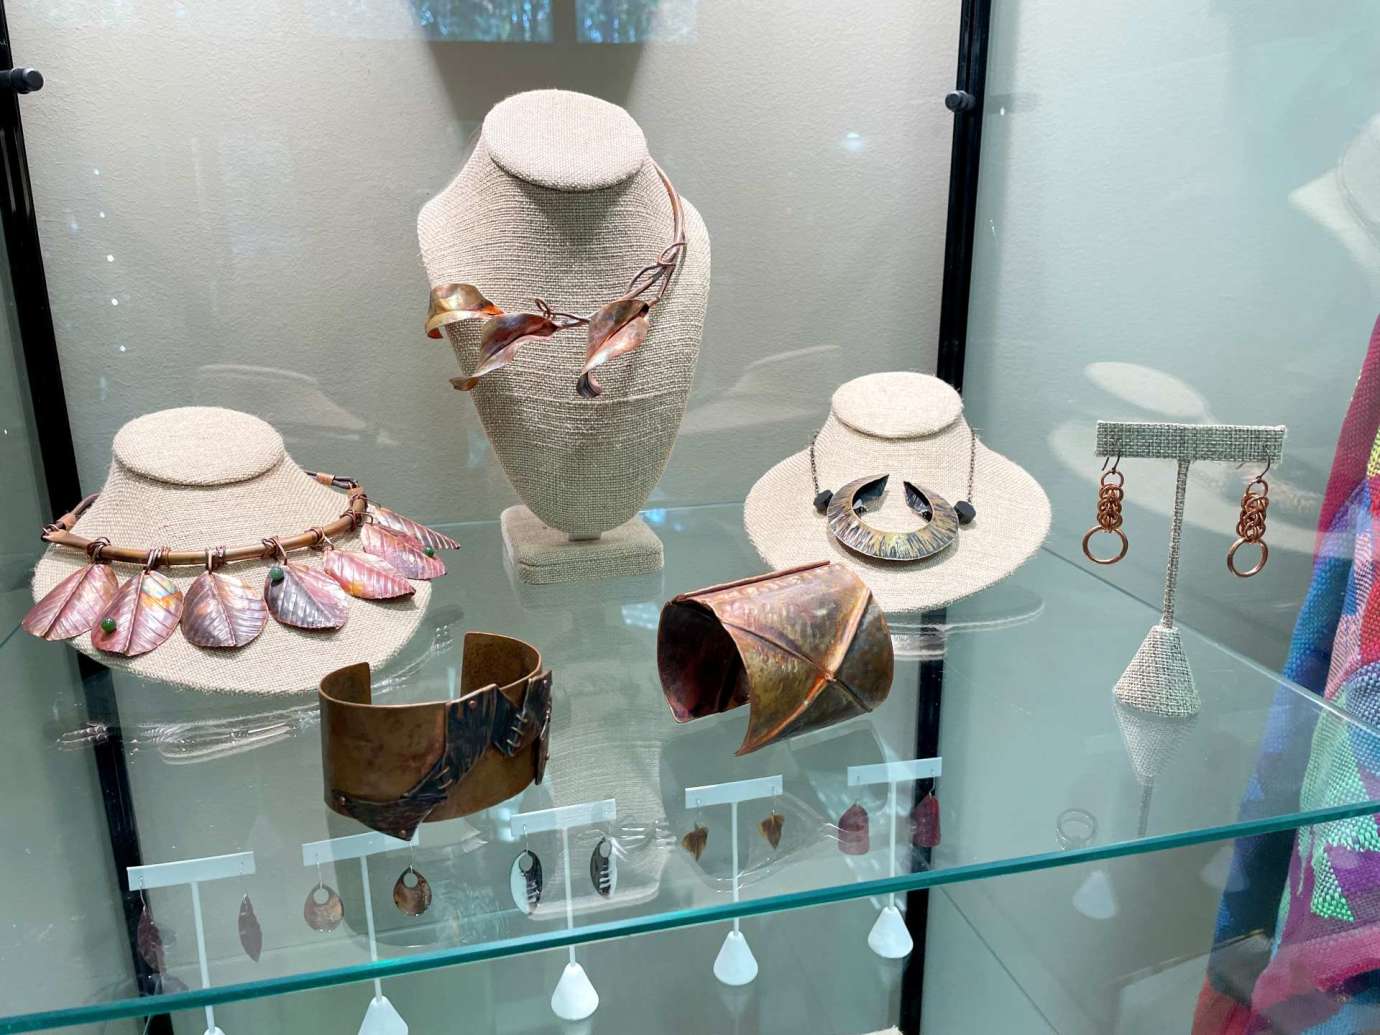 Handmade necklaces and bracelets in a display case by Katherine Cherry